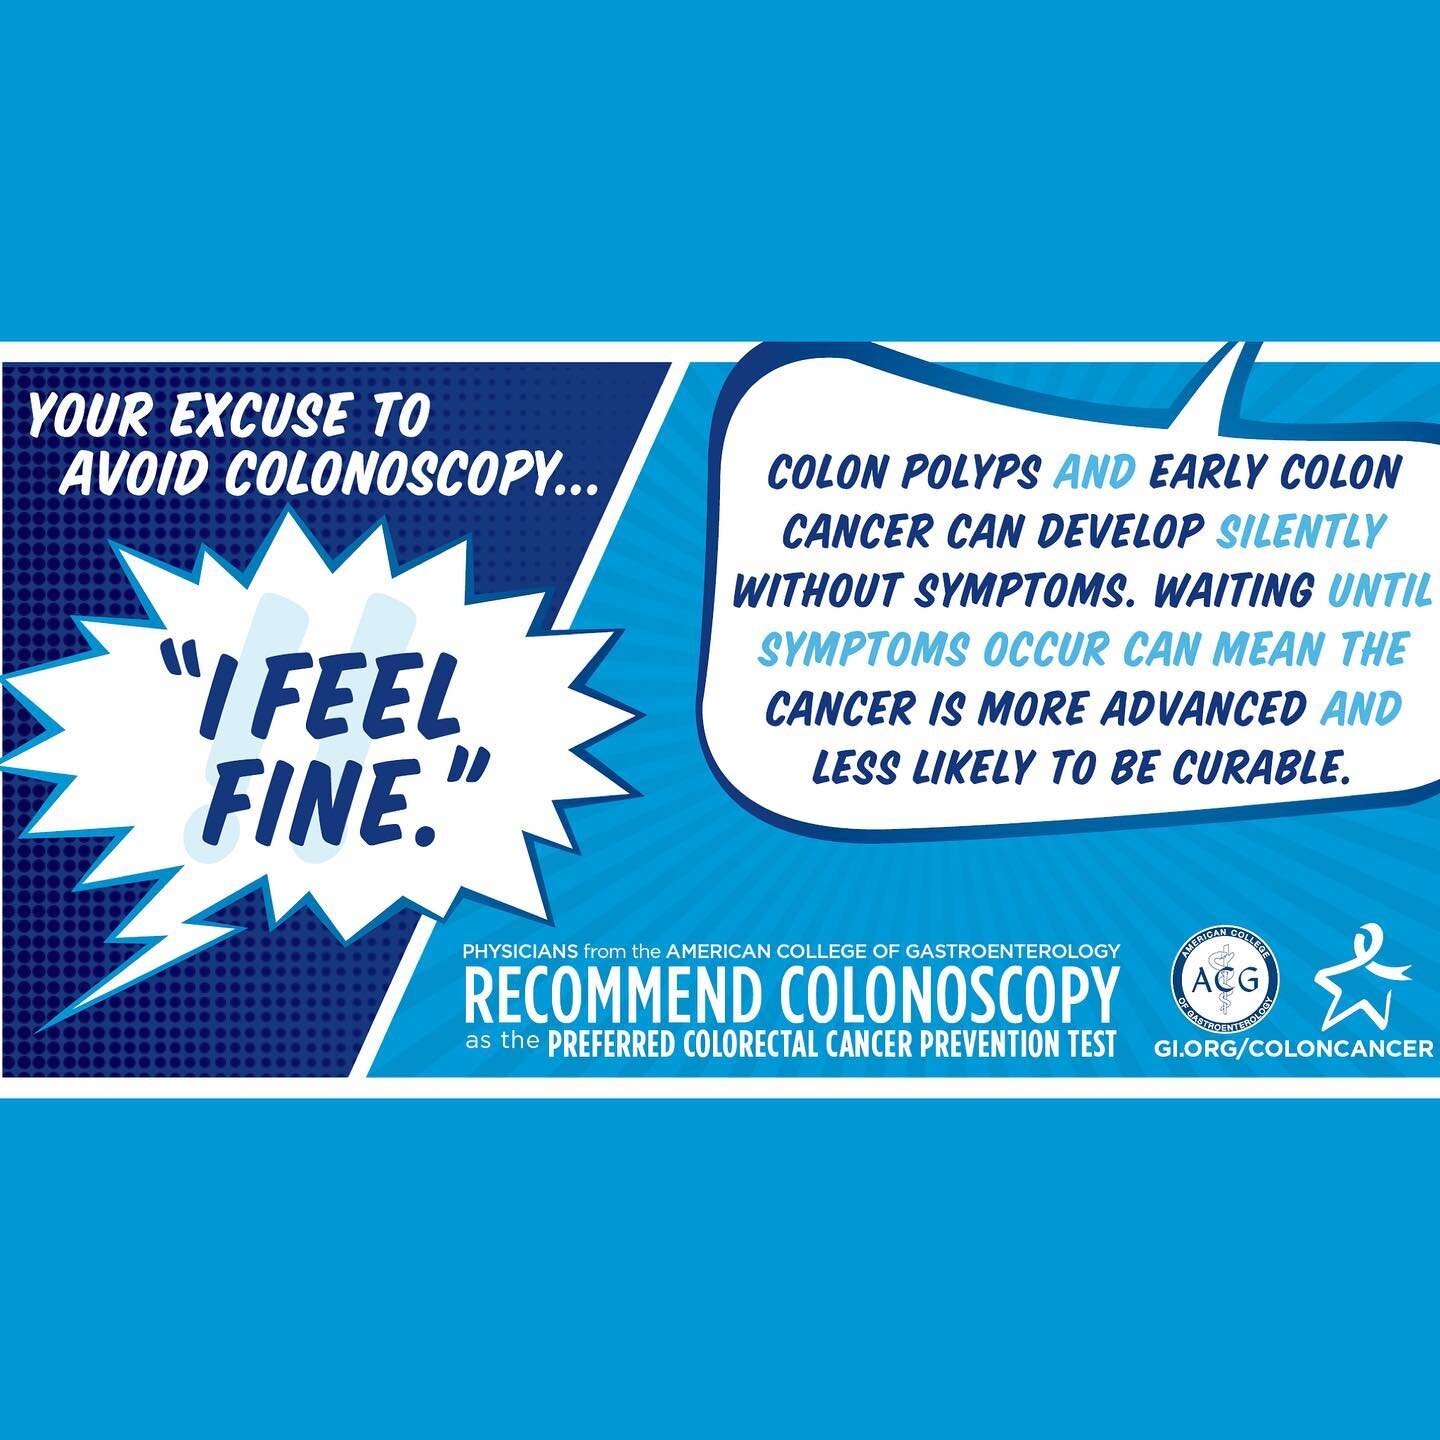 No symptoms? That&rsquo;s good but Unfortunately that can be true for some who develop #ColonCancer 😔
BUT that means all the more reason to get screened one way or another without delay by age 45 y/o ! So don&rsquo;t procrastinate! There are multipl